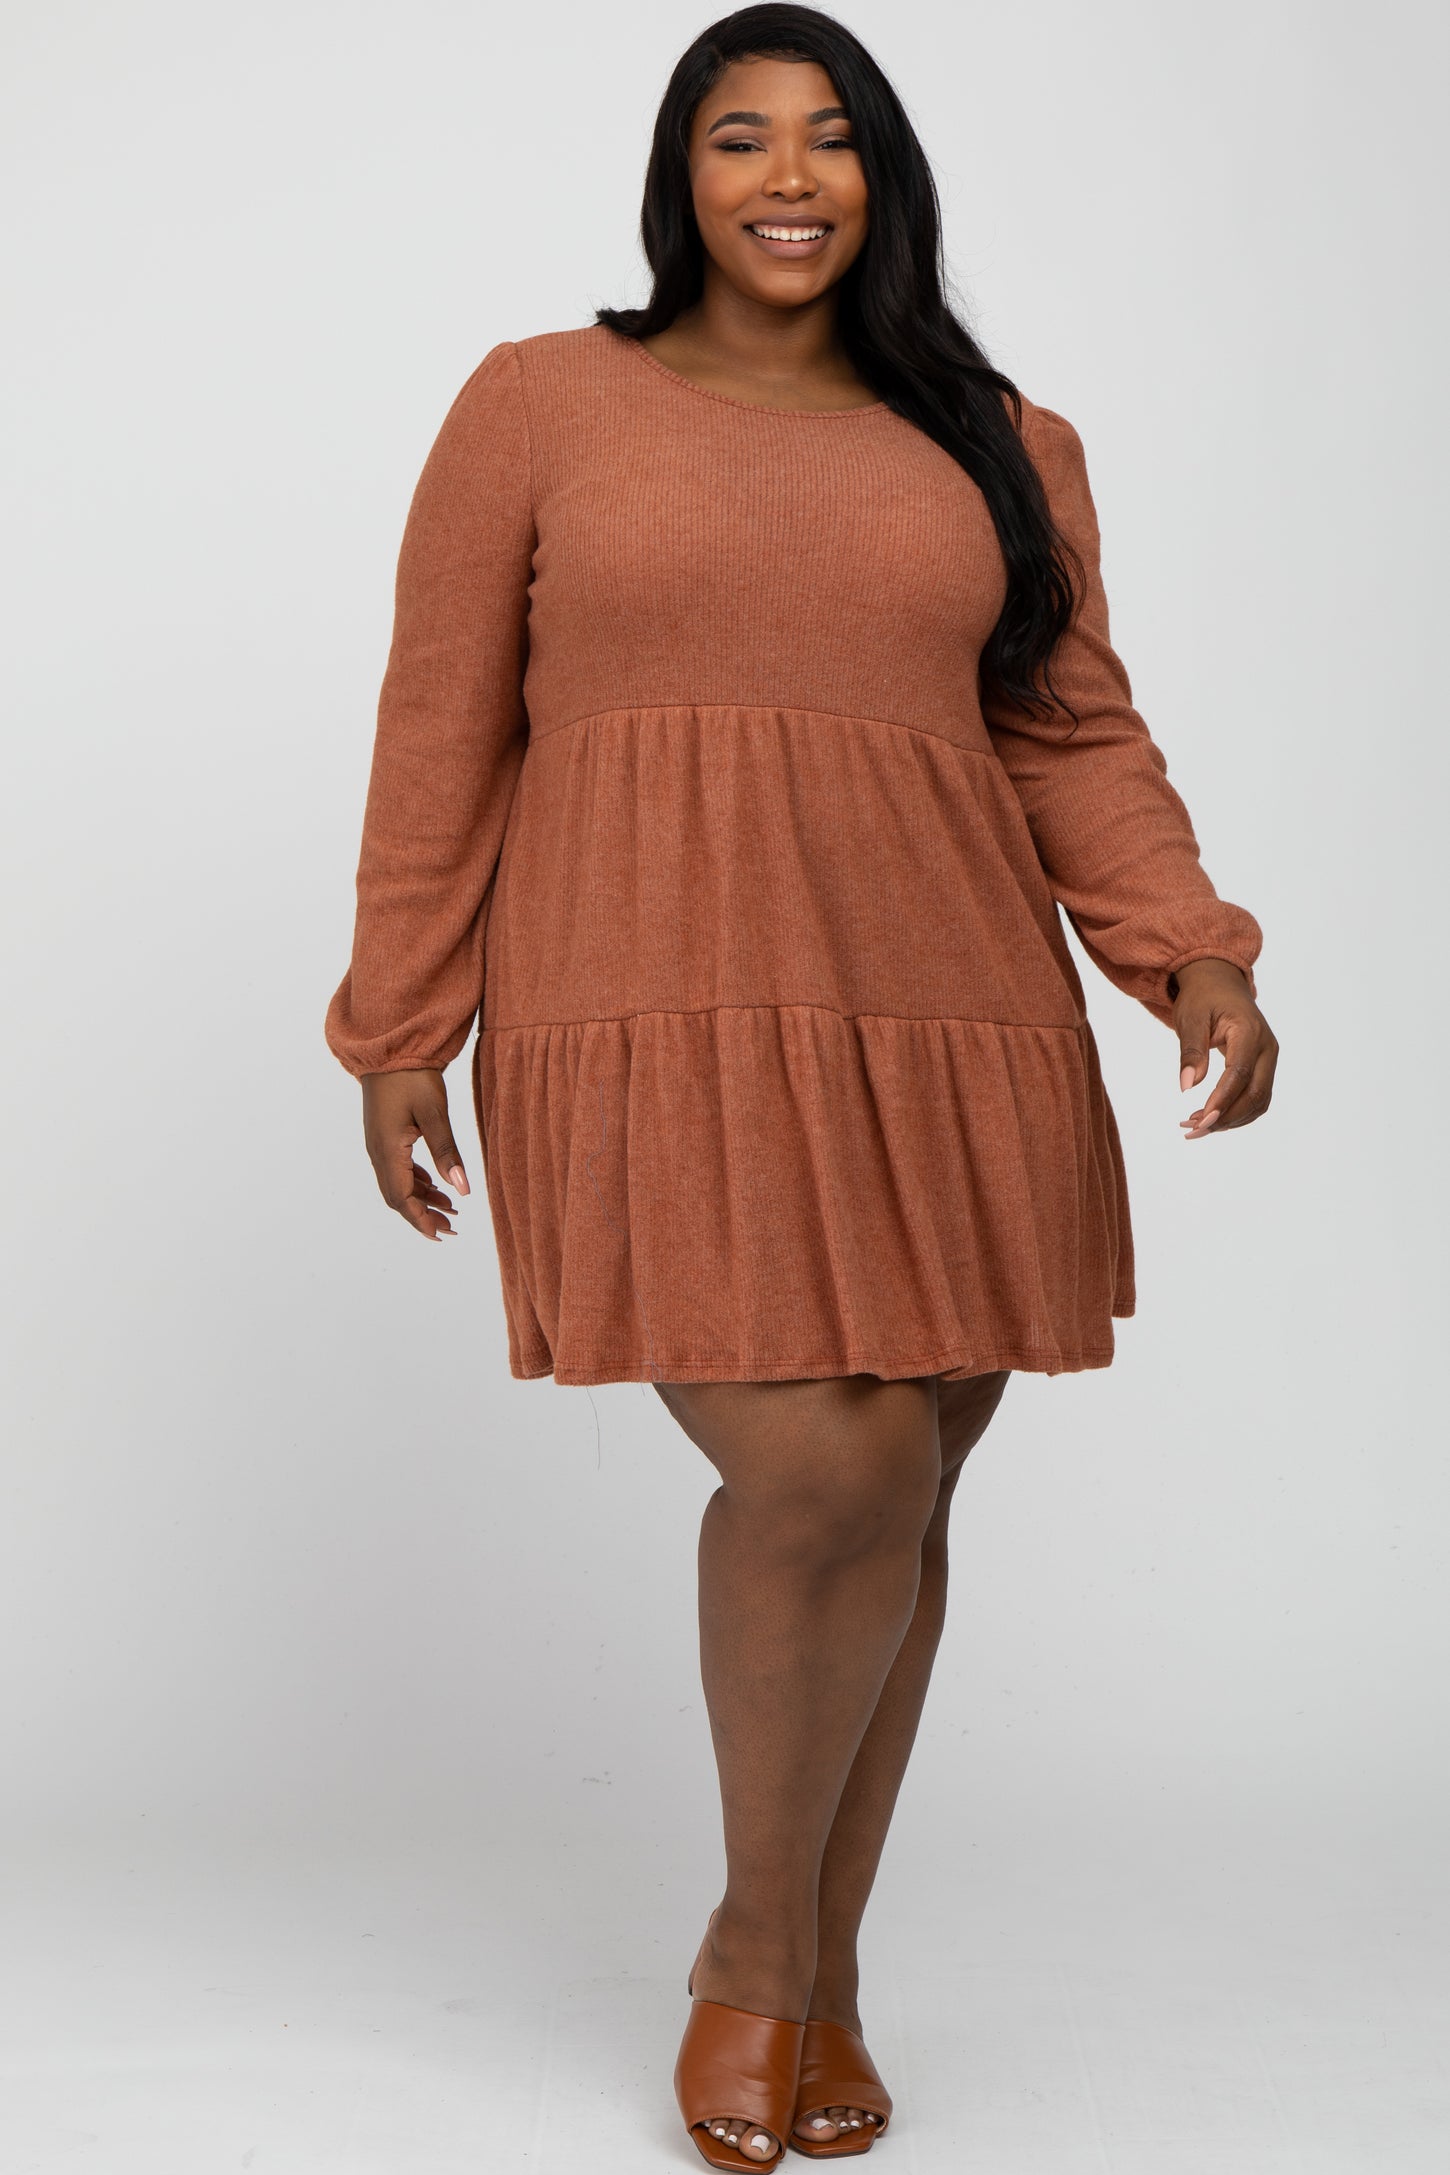 Rust Brushed Knit Tiered Plus Dress